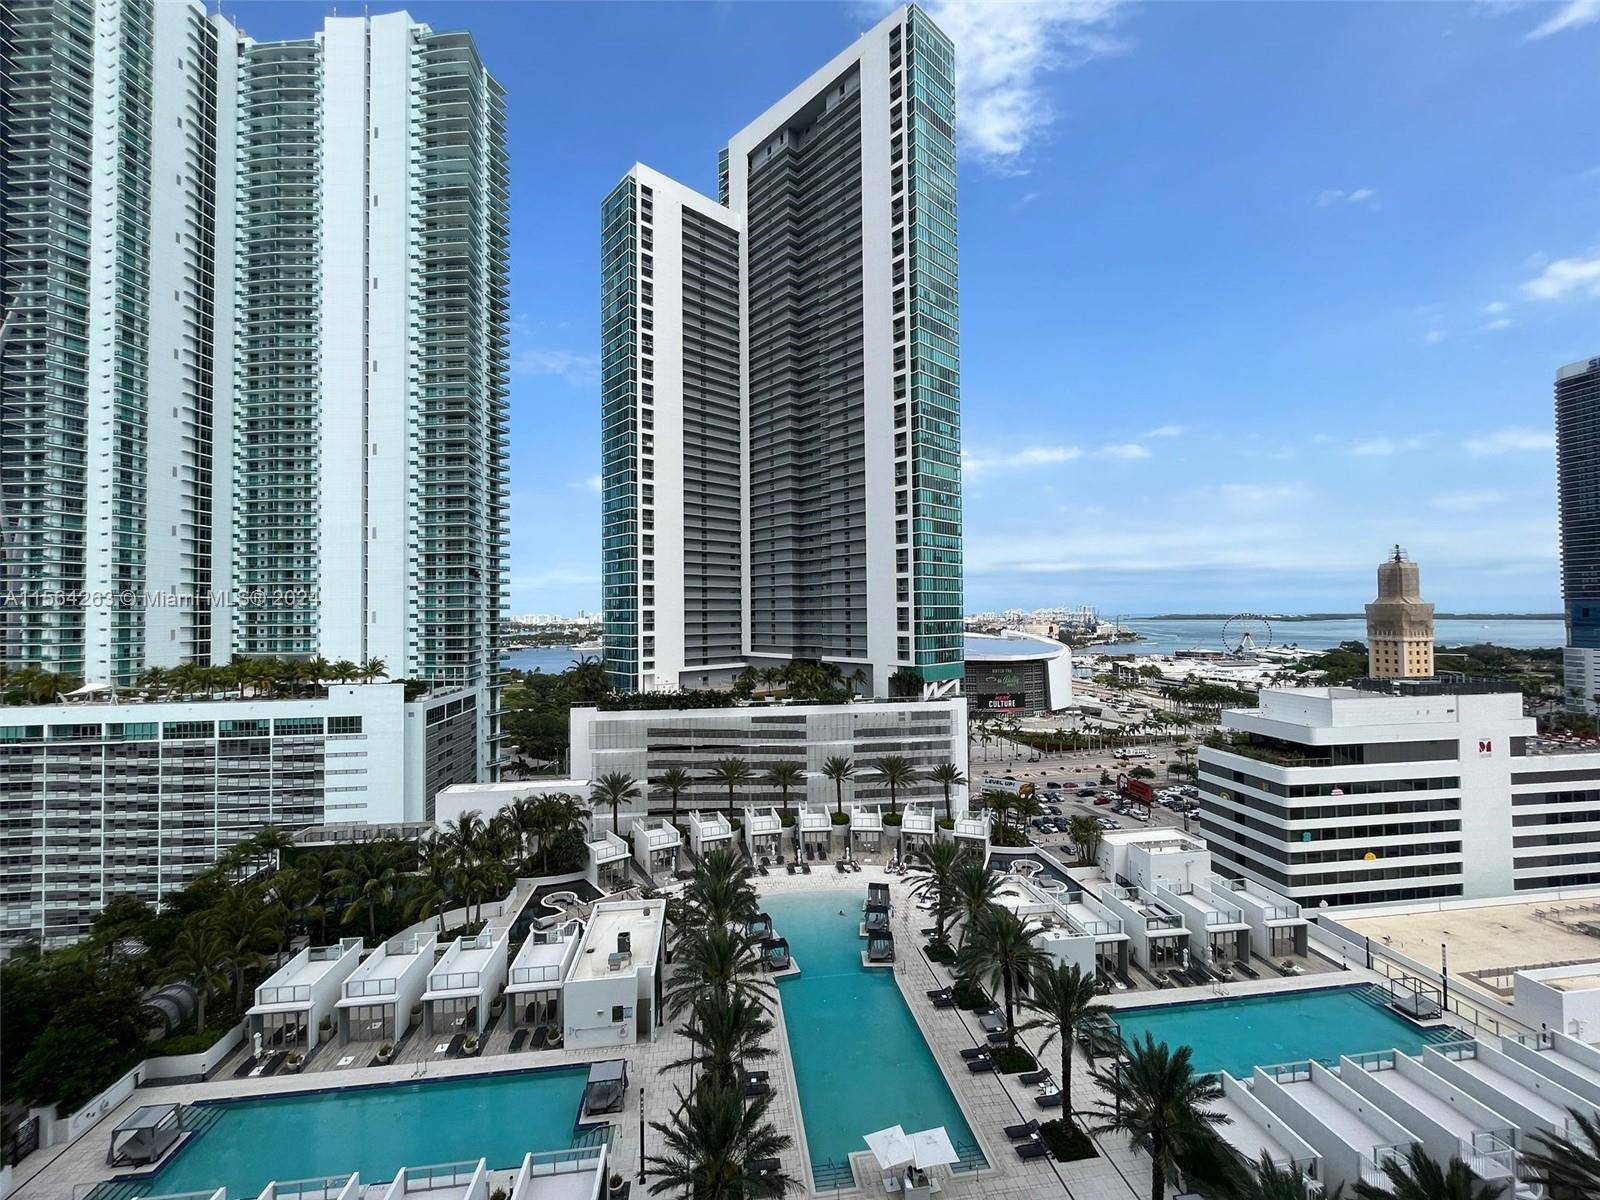 Beautiful modern 2 2 apartment located in downtown Miami right by the Miami Heat Arena, Bayside Marketplace and the Frost Museum.